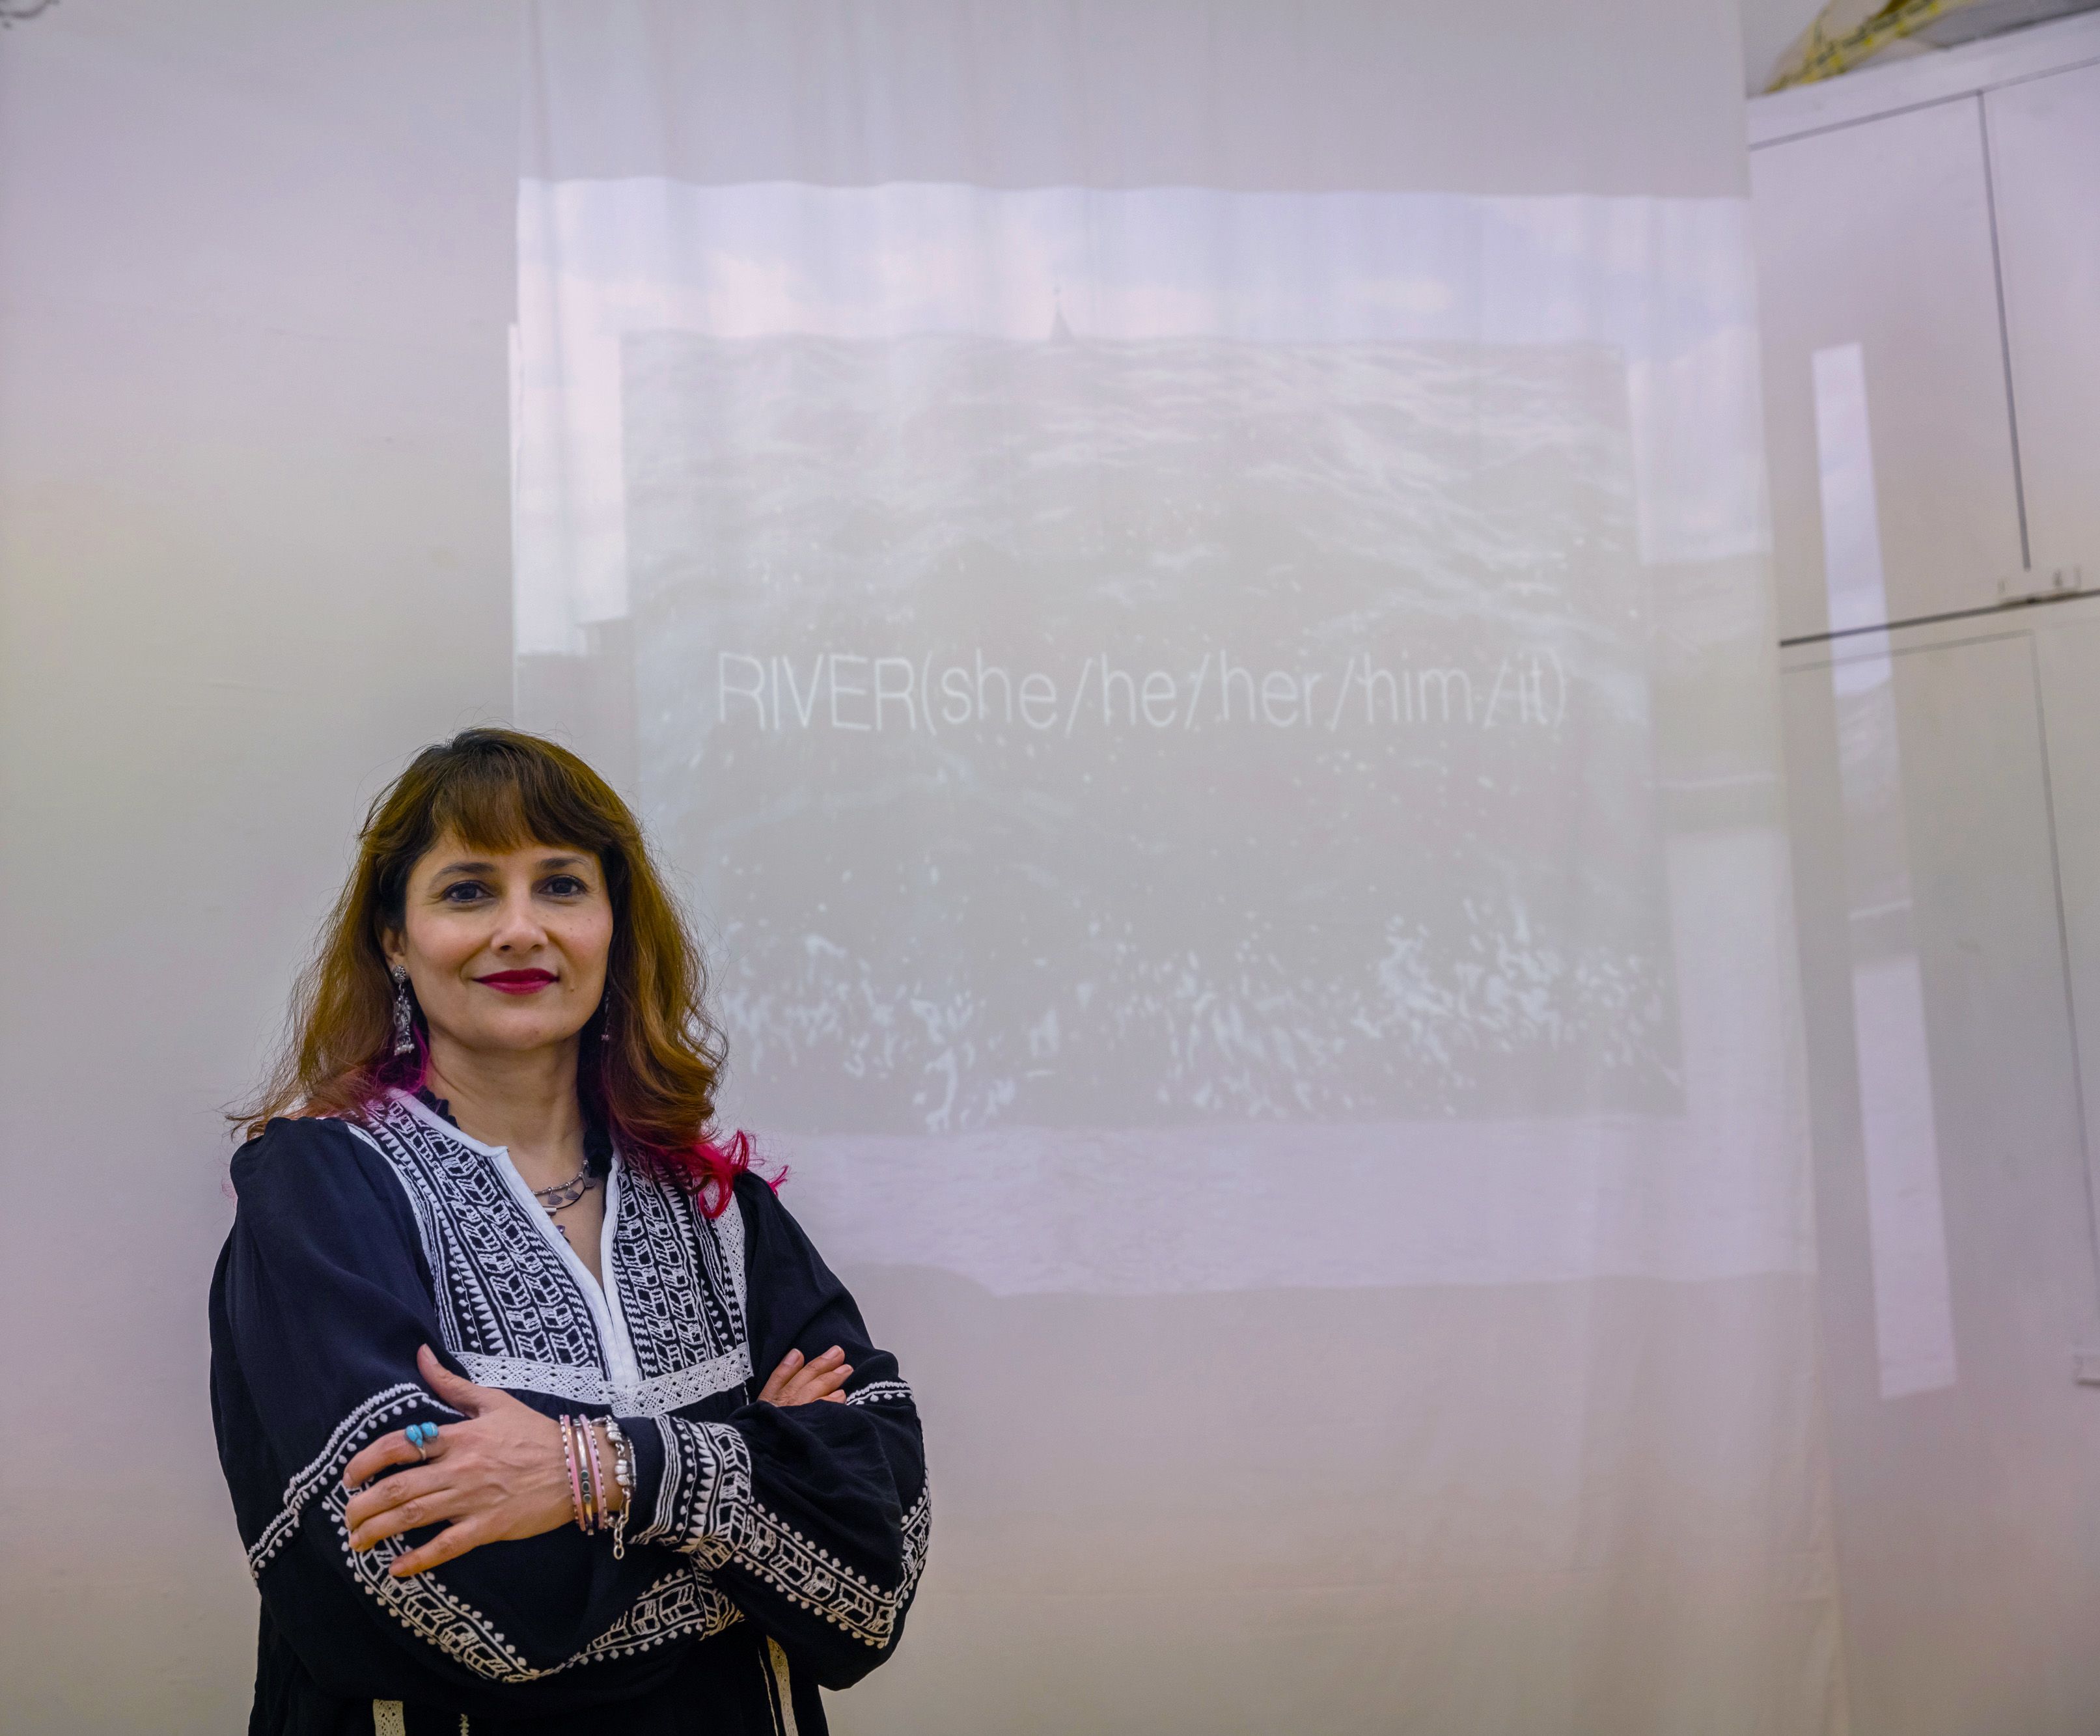 Anita stood infront of a projection that reads 'RIVER (she/he/him/it)' 